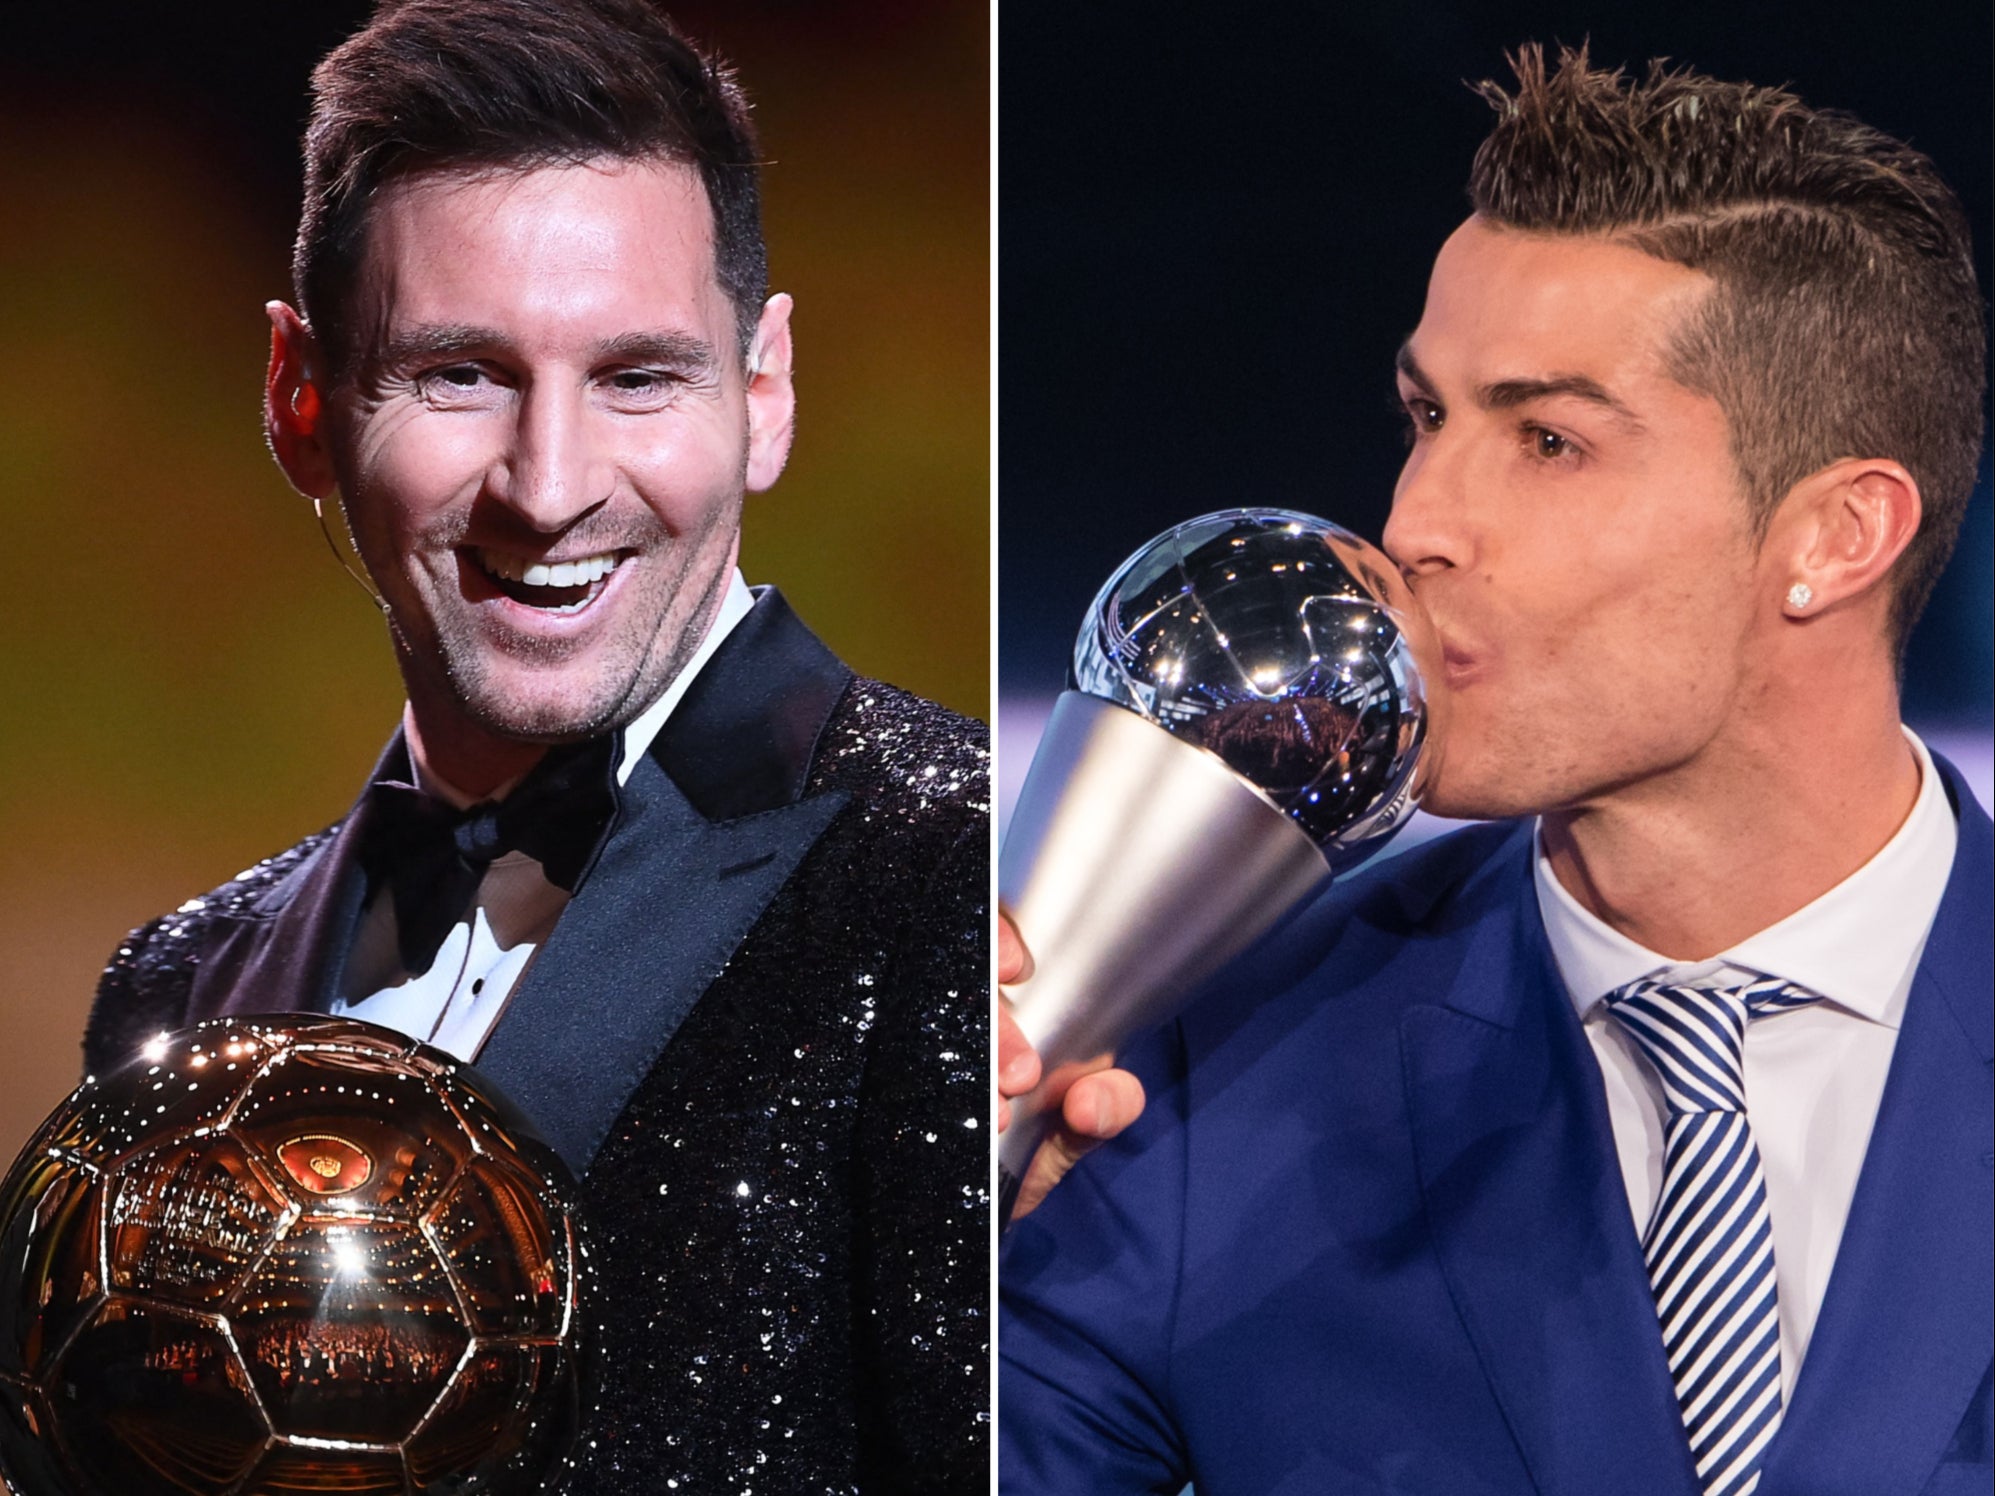 Lionel Messi and Cristiano Ronaldo have made a habit of winning the biggest prizes